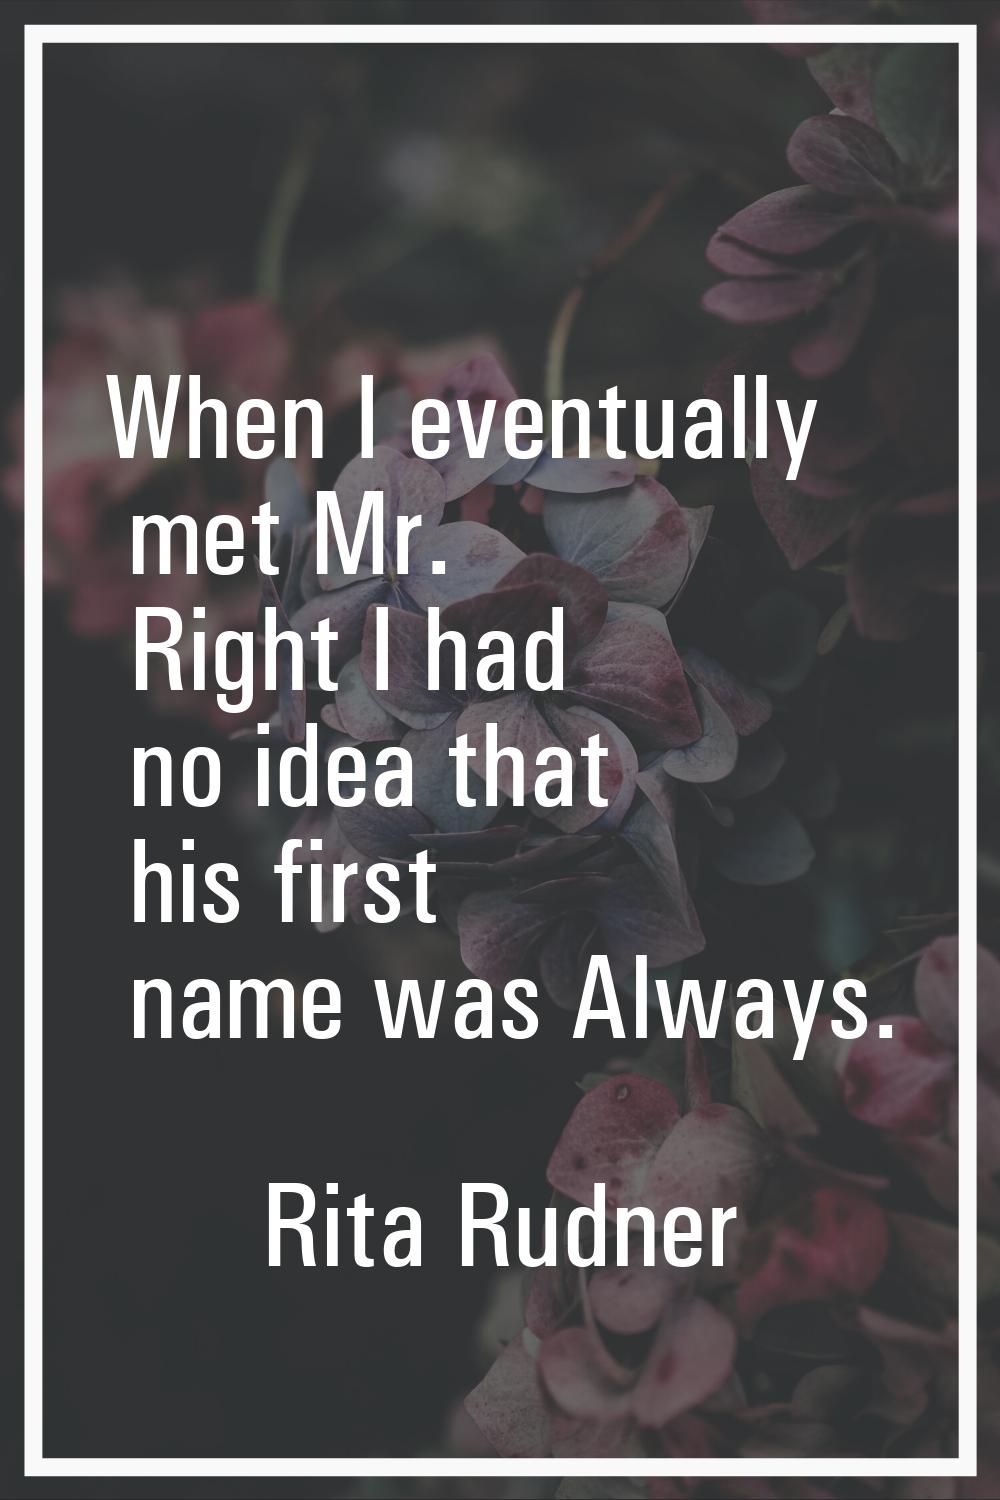 When I eventually met Mr. Right I had no idea that his first name was Always.